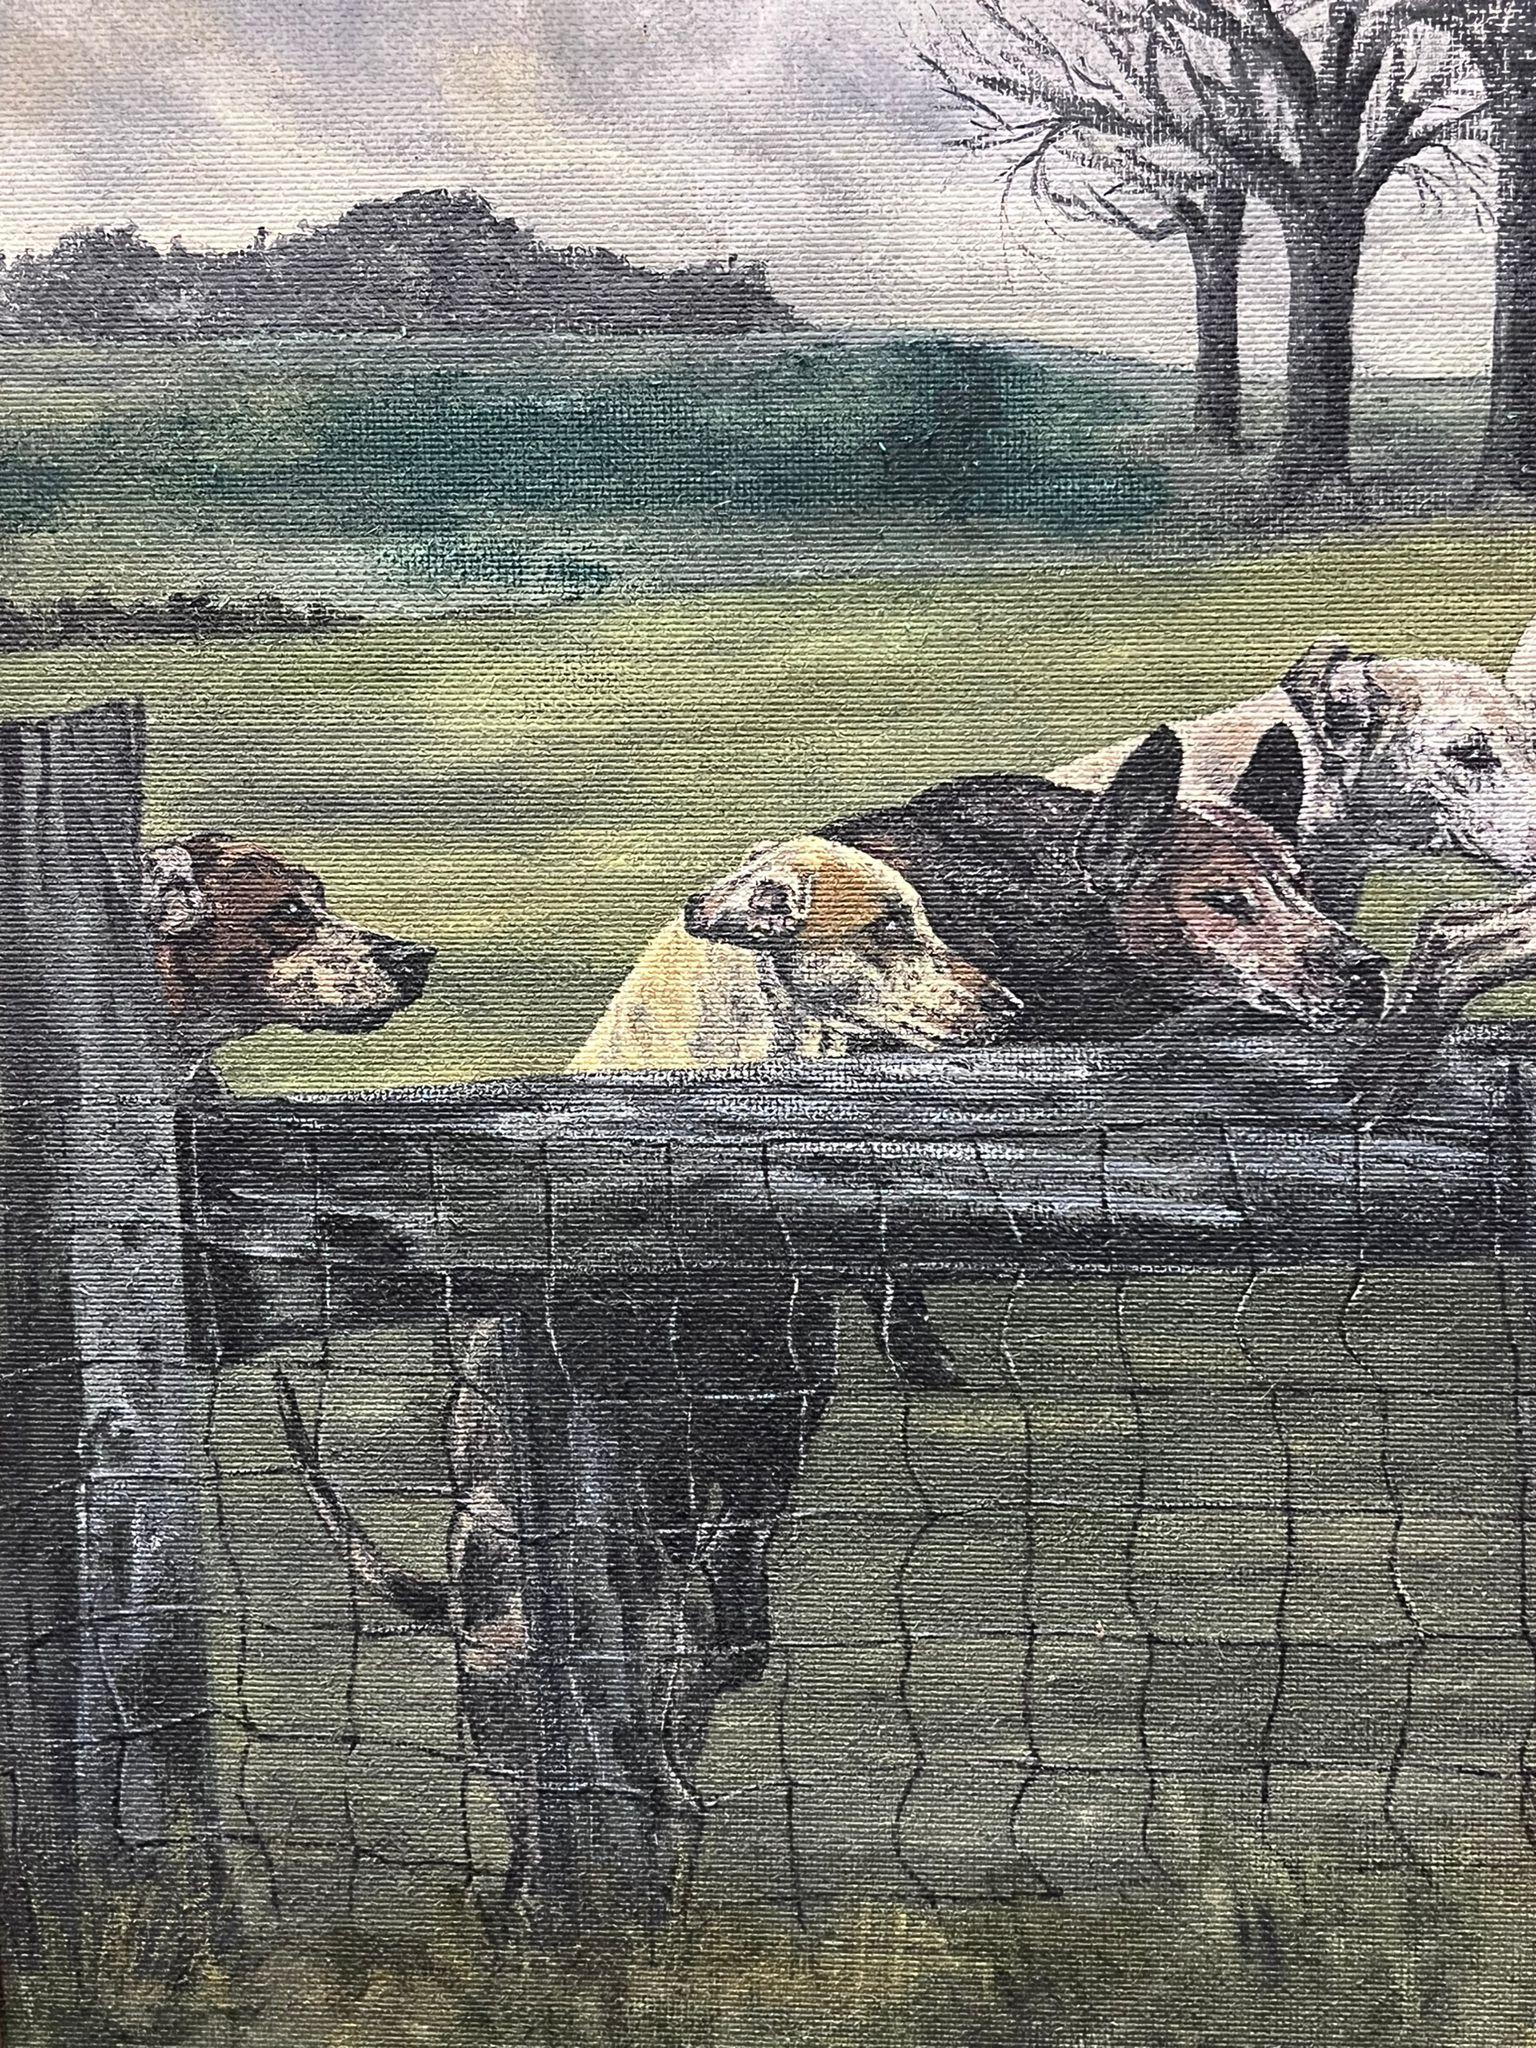 Huge British Sporting Oil Painting Hunting Hounds in Full Pursuit over Fence For Sale 1